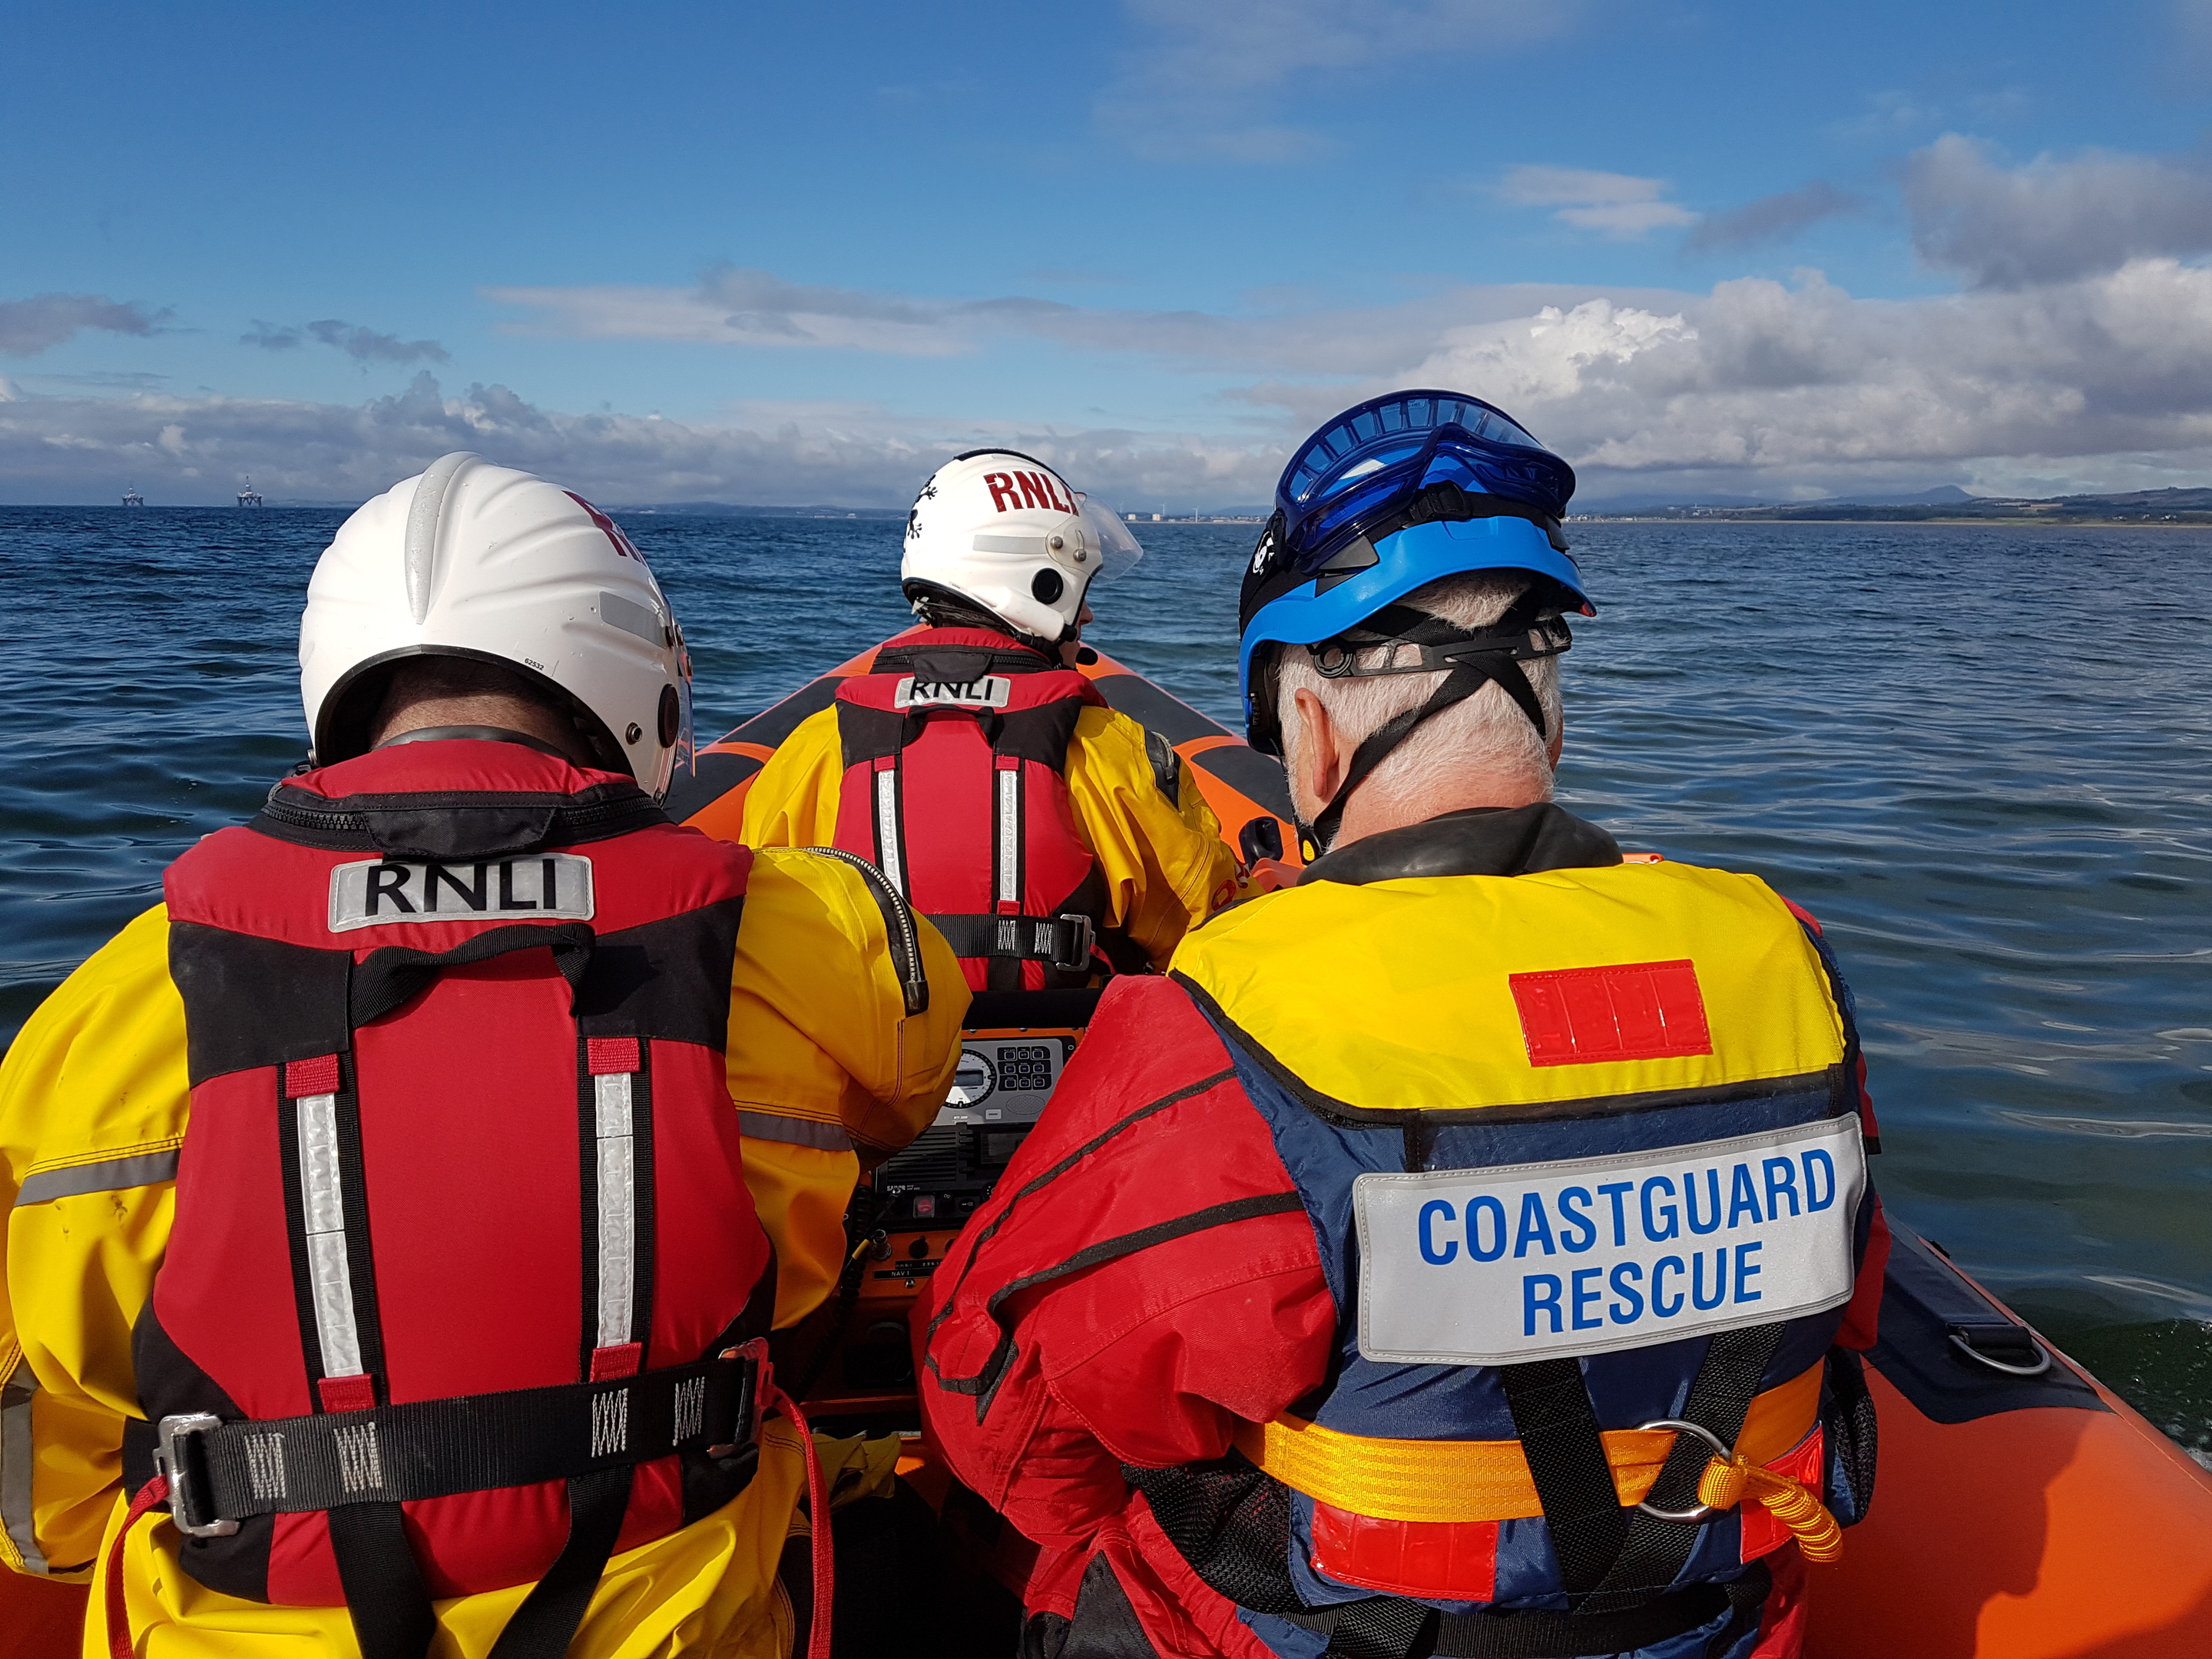 Coastguard rescued the vessel in the early hours.